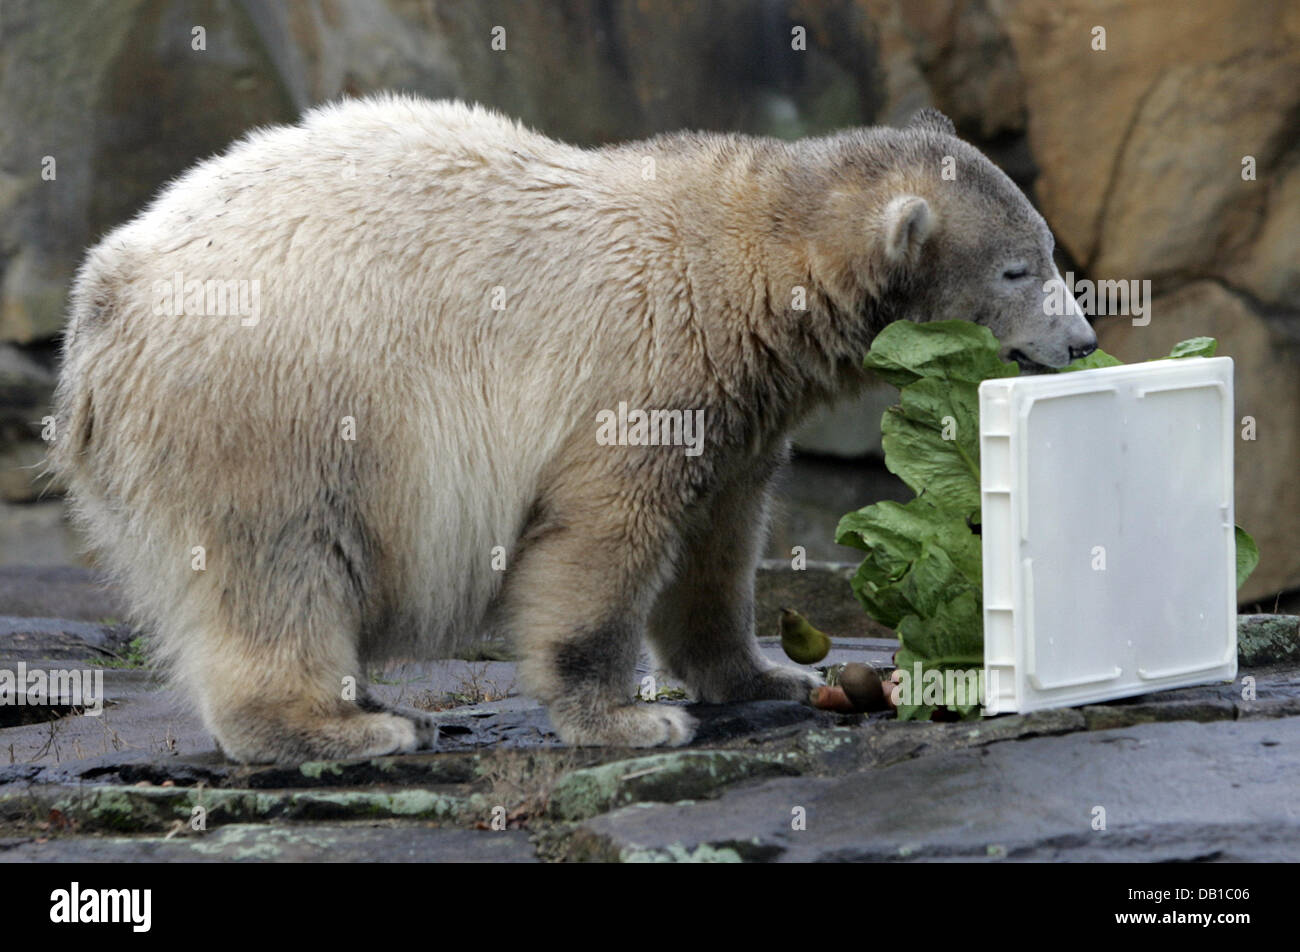 Polar bear Knut nibbles on its special birthday cake as it clebrates its first birthday at the zoo in Berlin, 05 December 2007. More than 2.5 million people have already come to see the polar bear. In its first year of life Knut increased its weight from 810 gr to 110 kg. Photo: Rainer Jensen Stock Photo